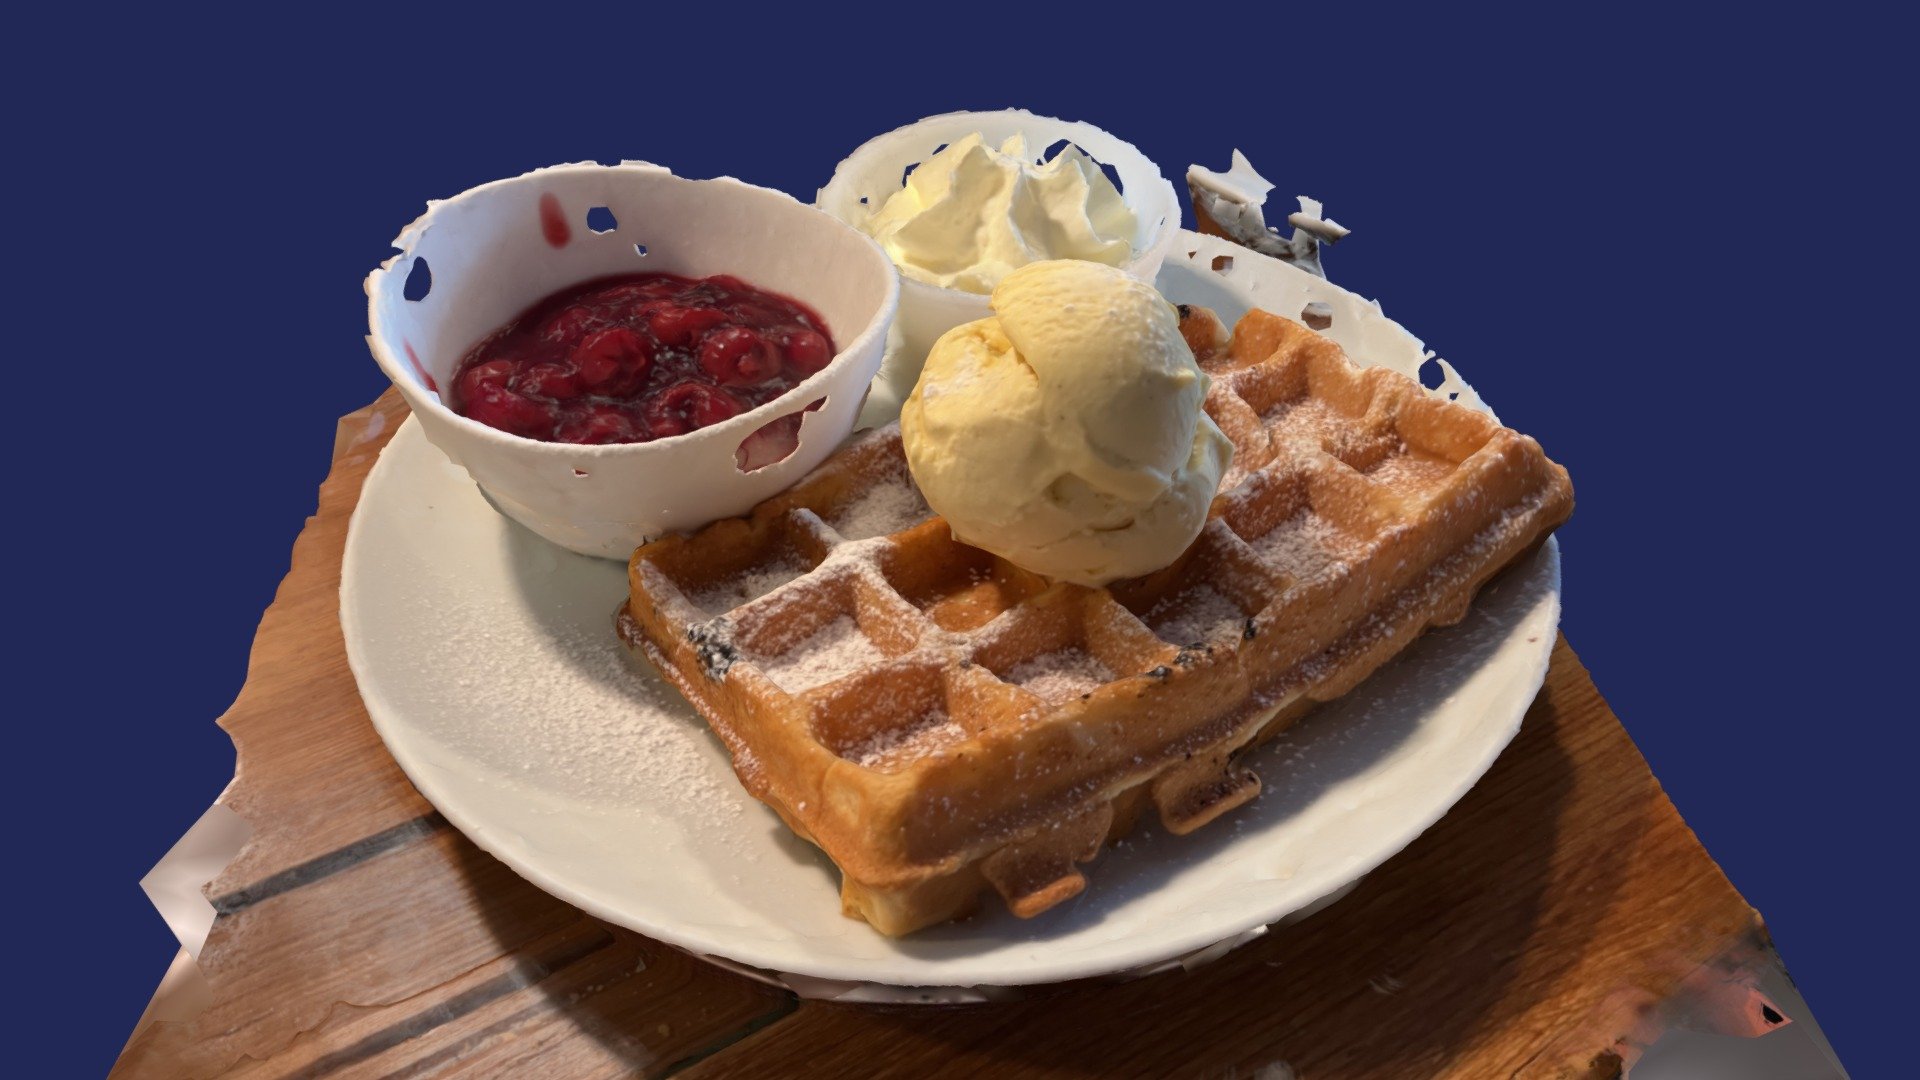 Photorealistic Waffle with Cherries and Ice Cream 🍒🍦🍨 - Waffle with Cherries and Ice Cream - 3D model by ScanMaster 3d model